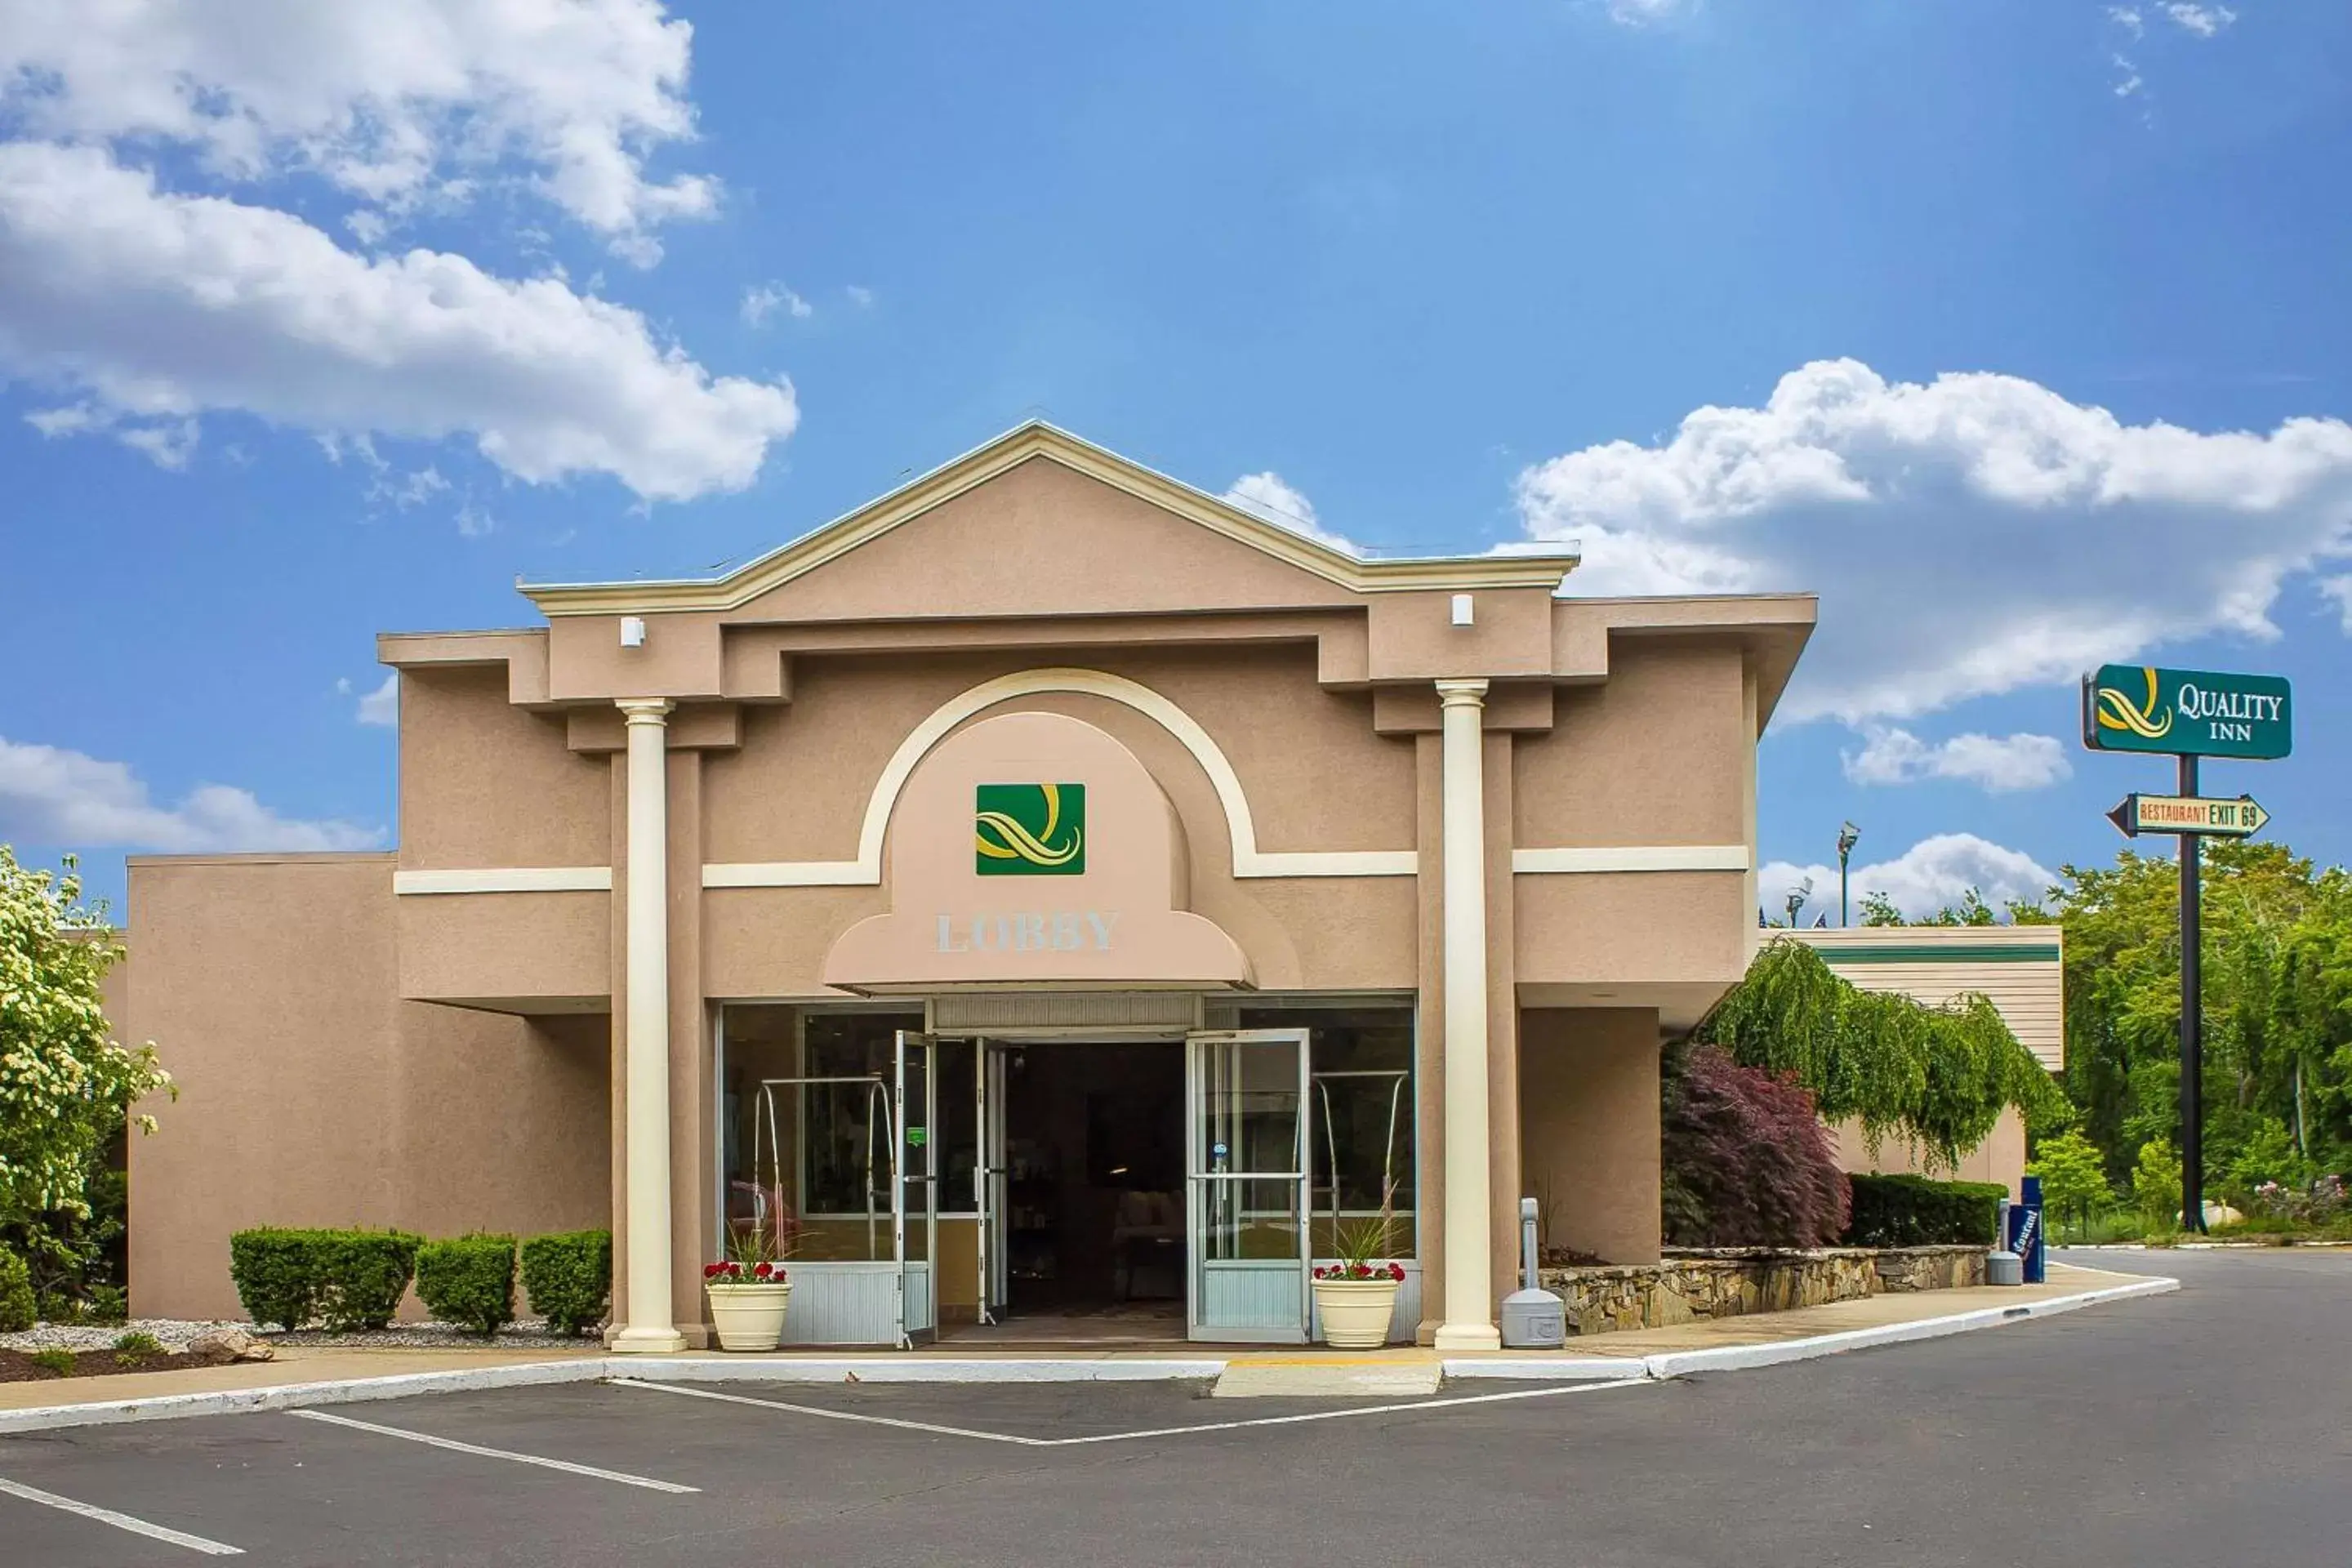 Property Building in Quality Inn Old Saybrook - Westbrook